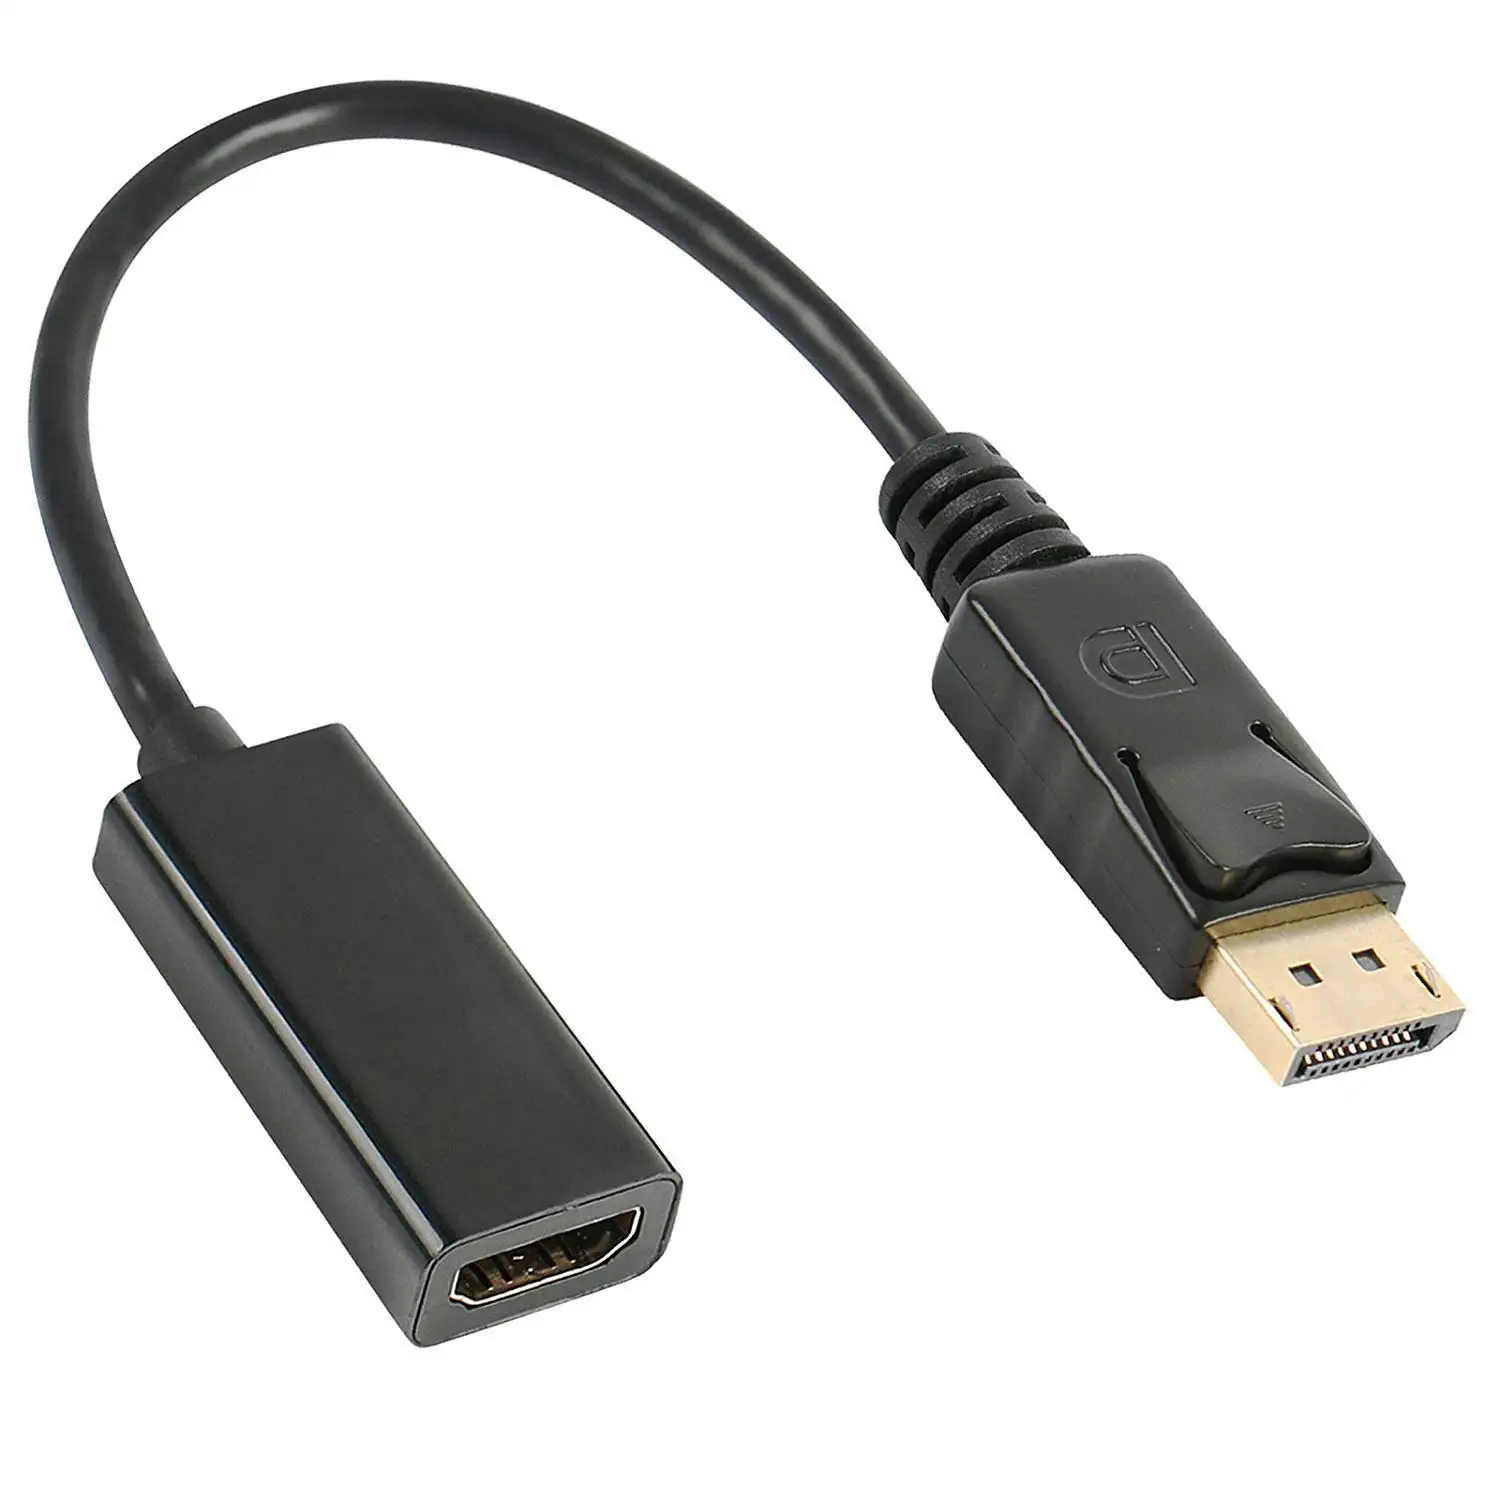 DisplayPort to HDMI Adapter cable DP Male to hdmi Female converter for DisplayPort Enabled Desktop